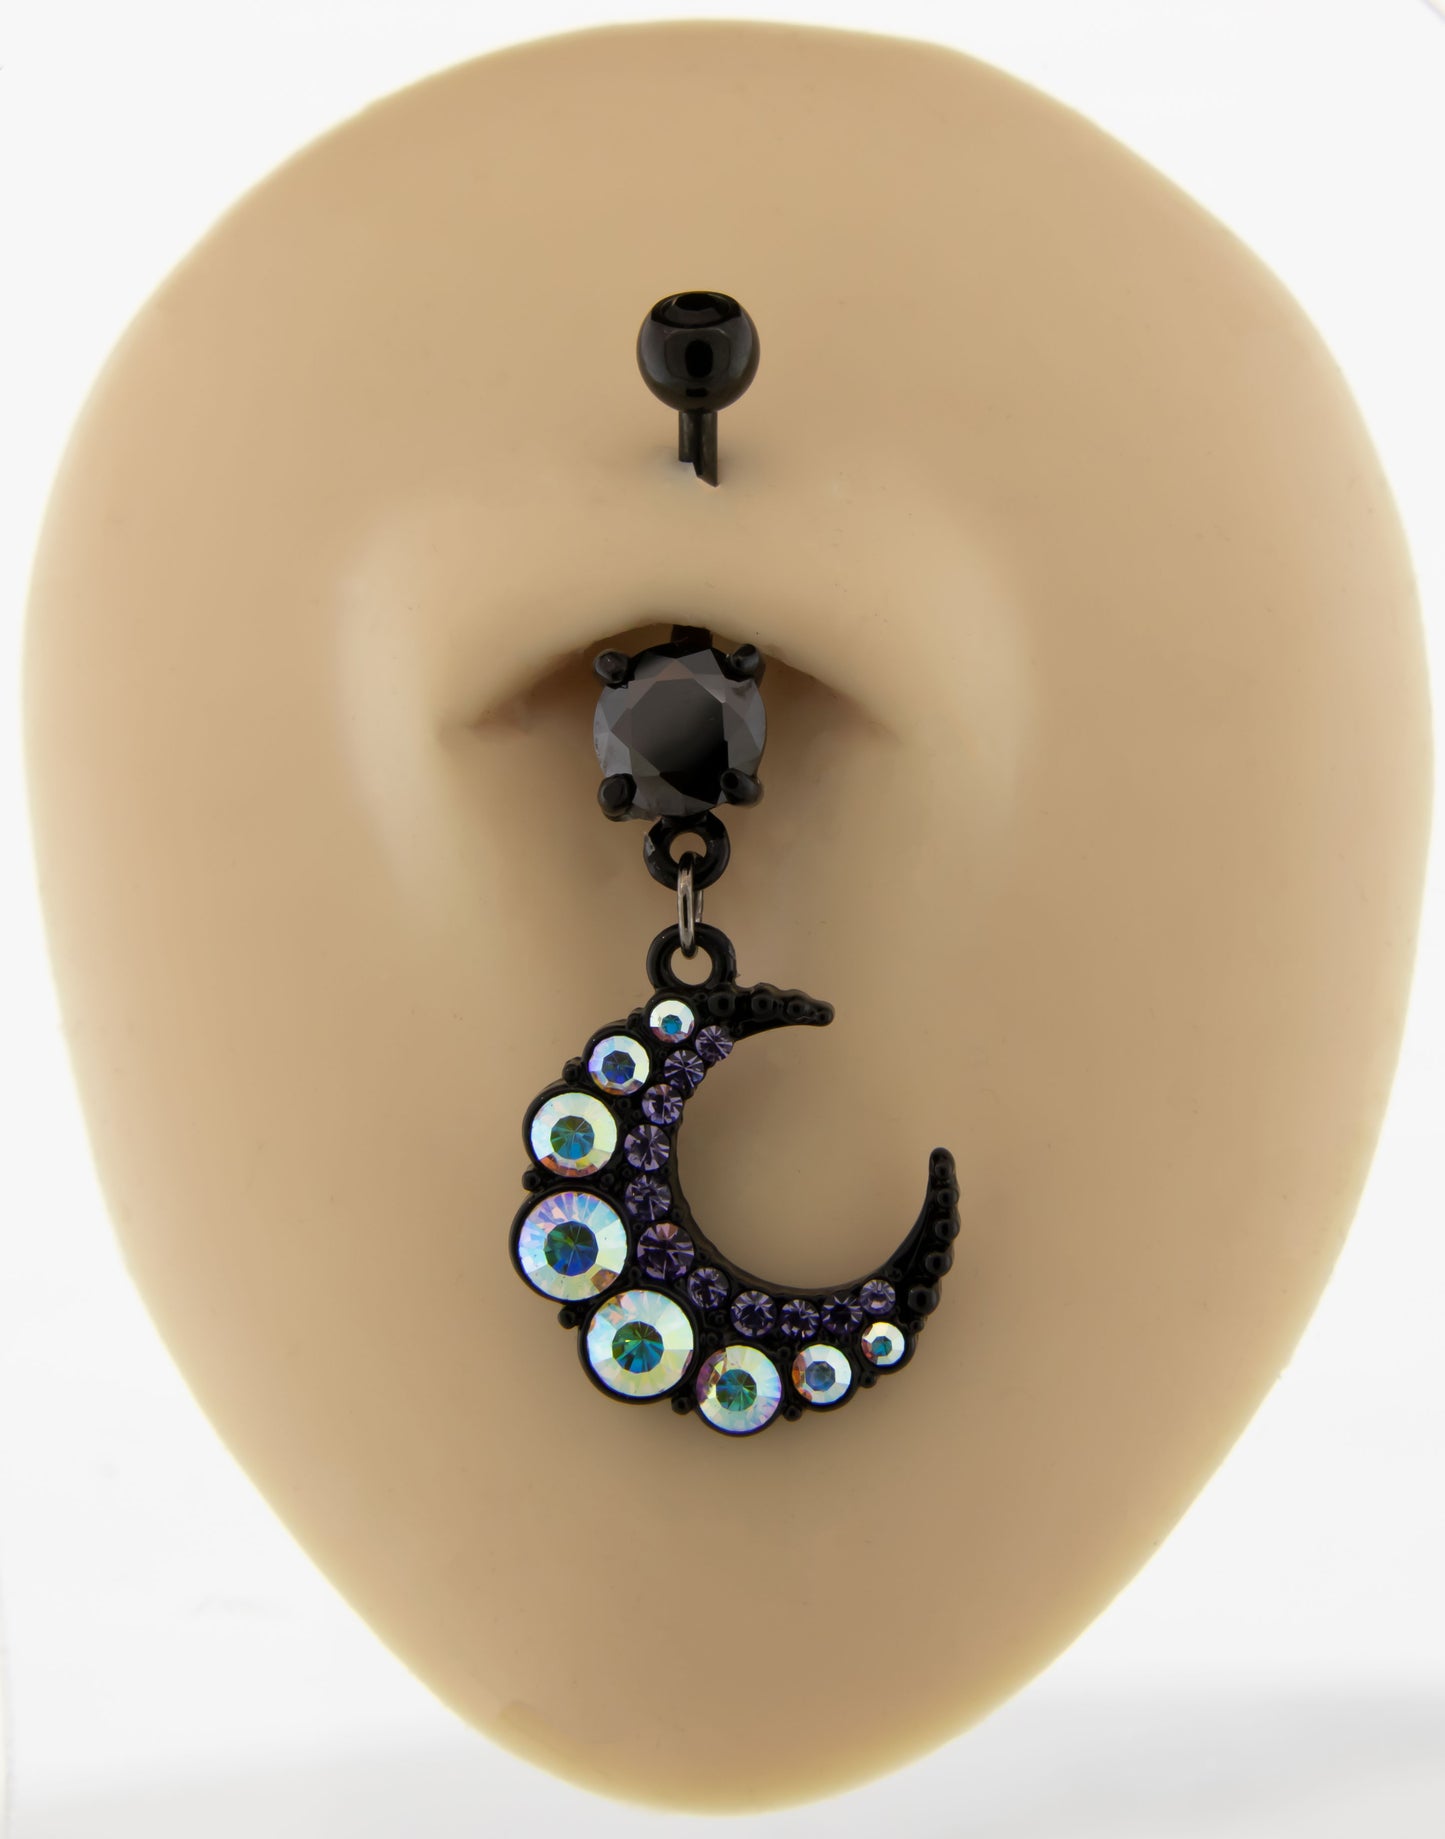 14G Crescent Moon With Gems Navel Ring - Pierced Addiction